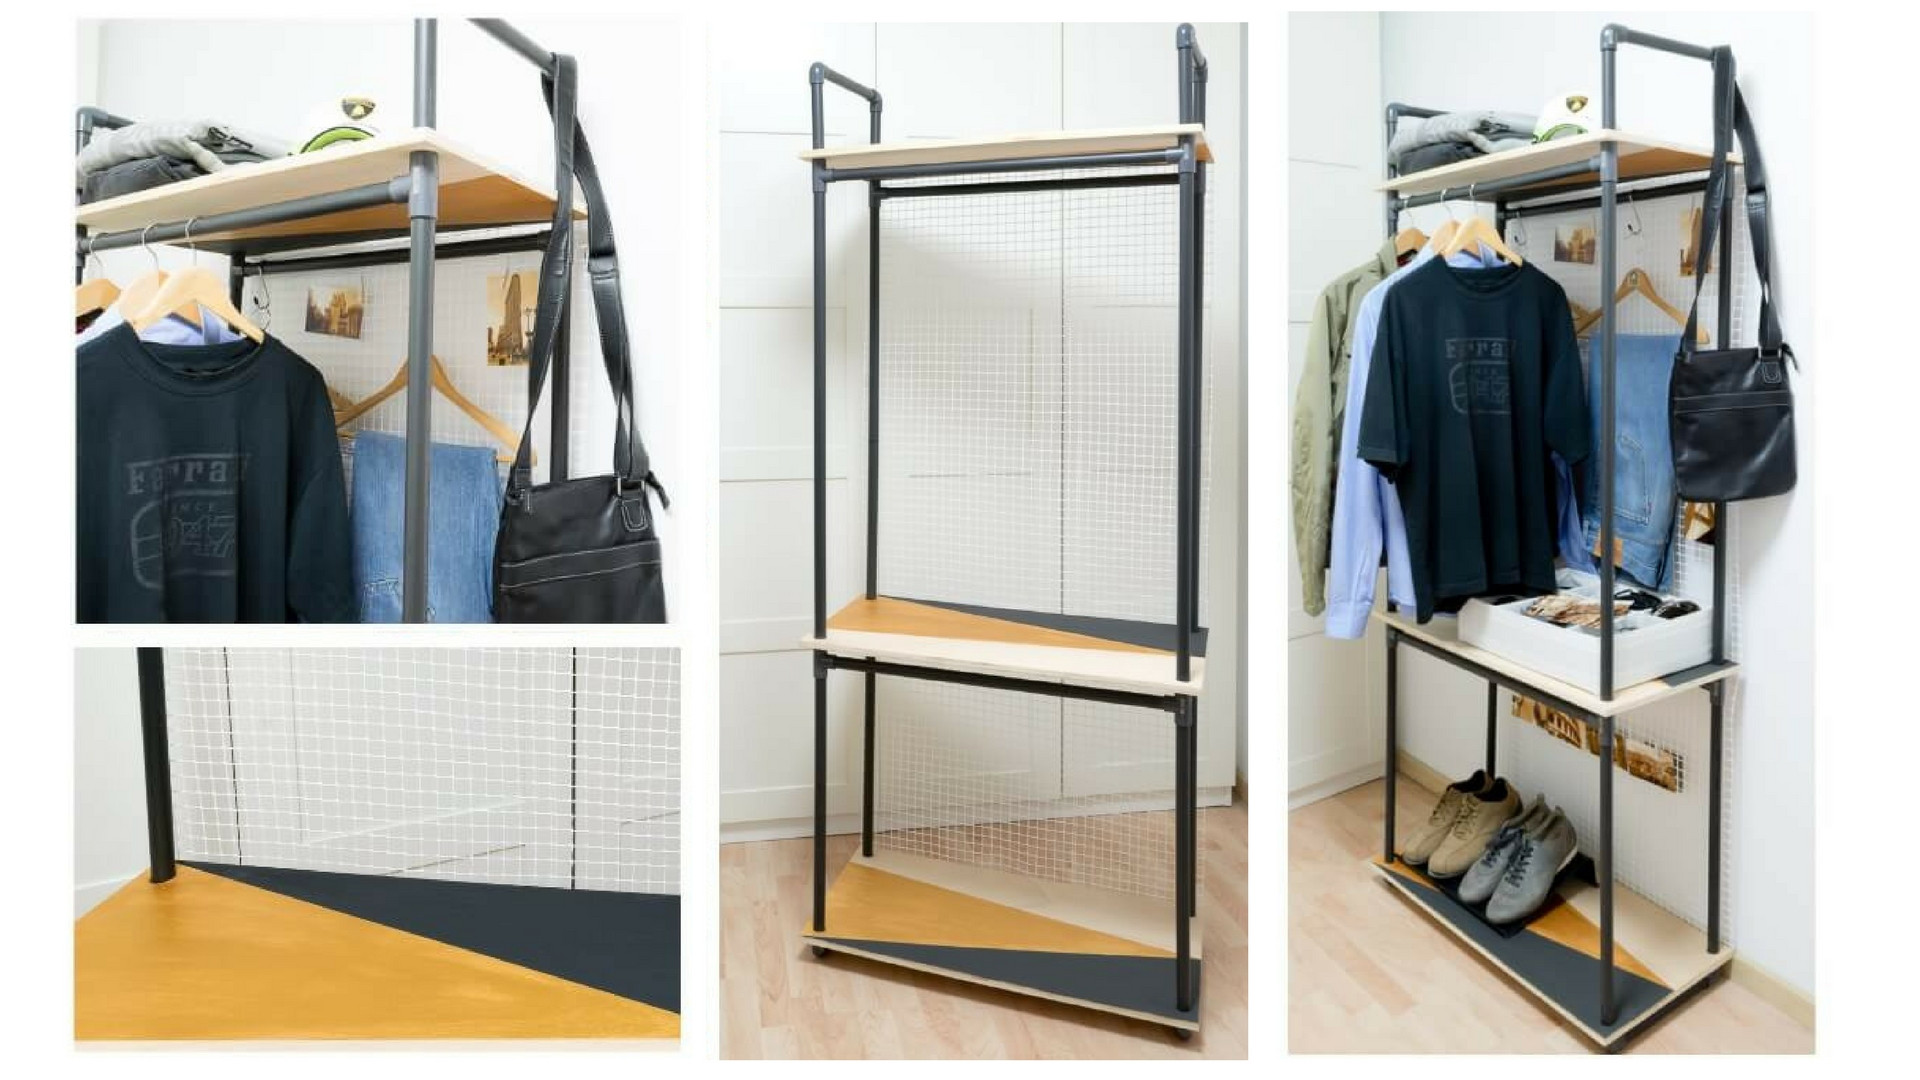 DIY Pipe Clothes Rack
 DIY PVC Pipe Clothes Rack The Handy Mano